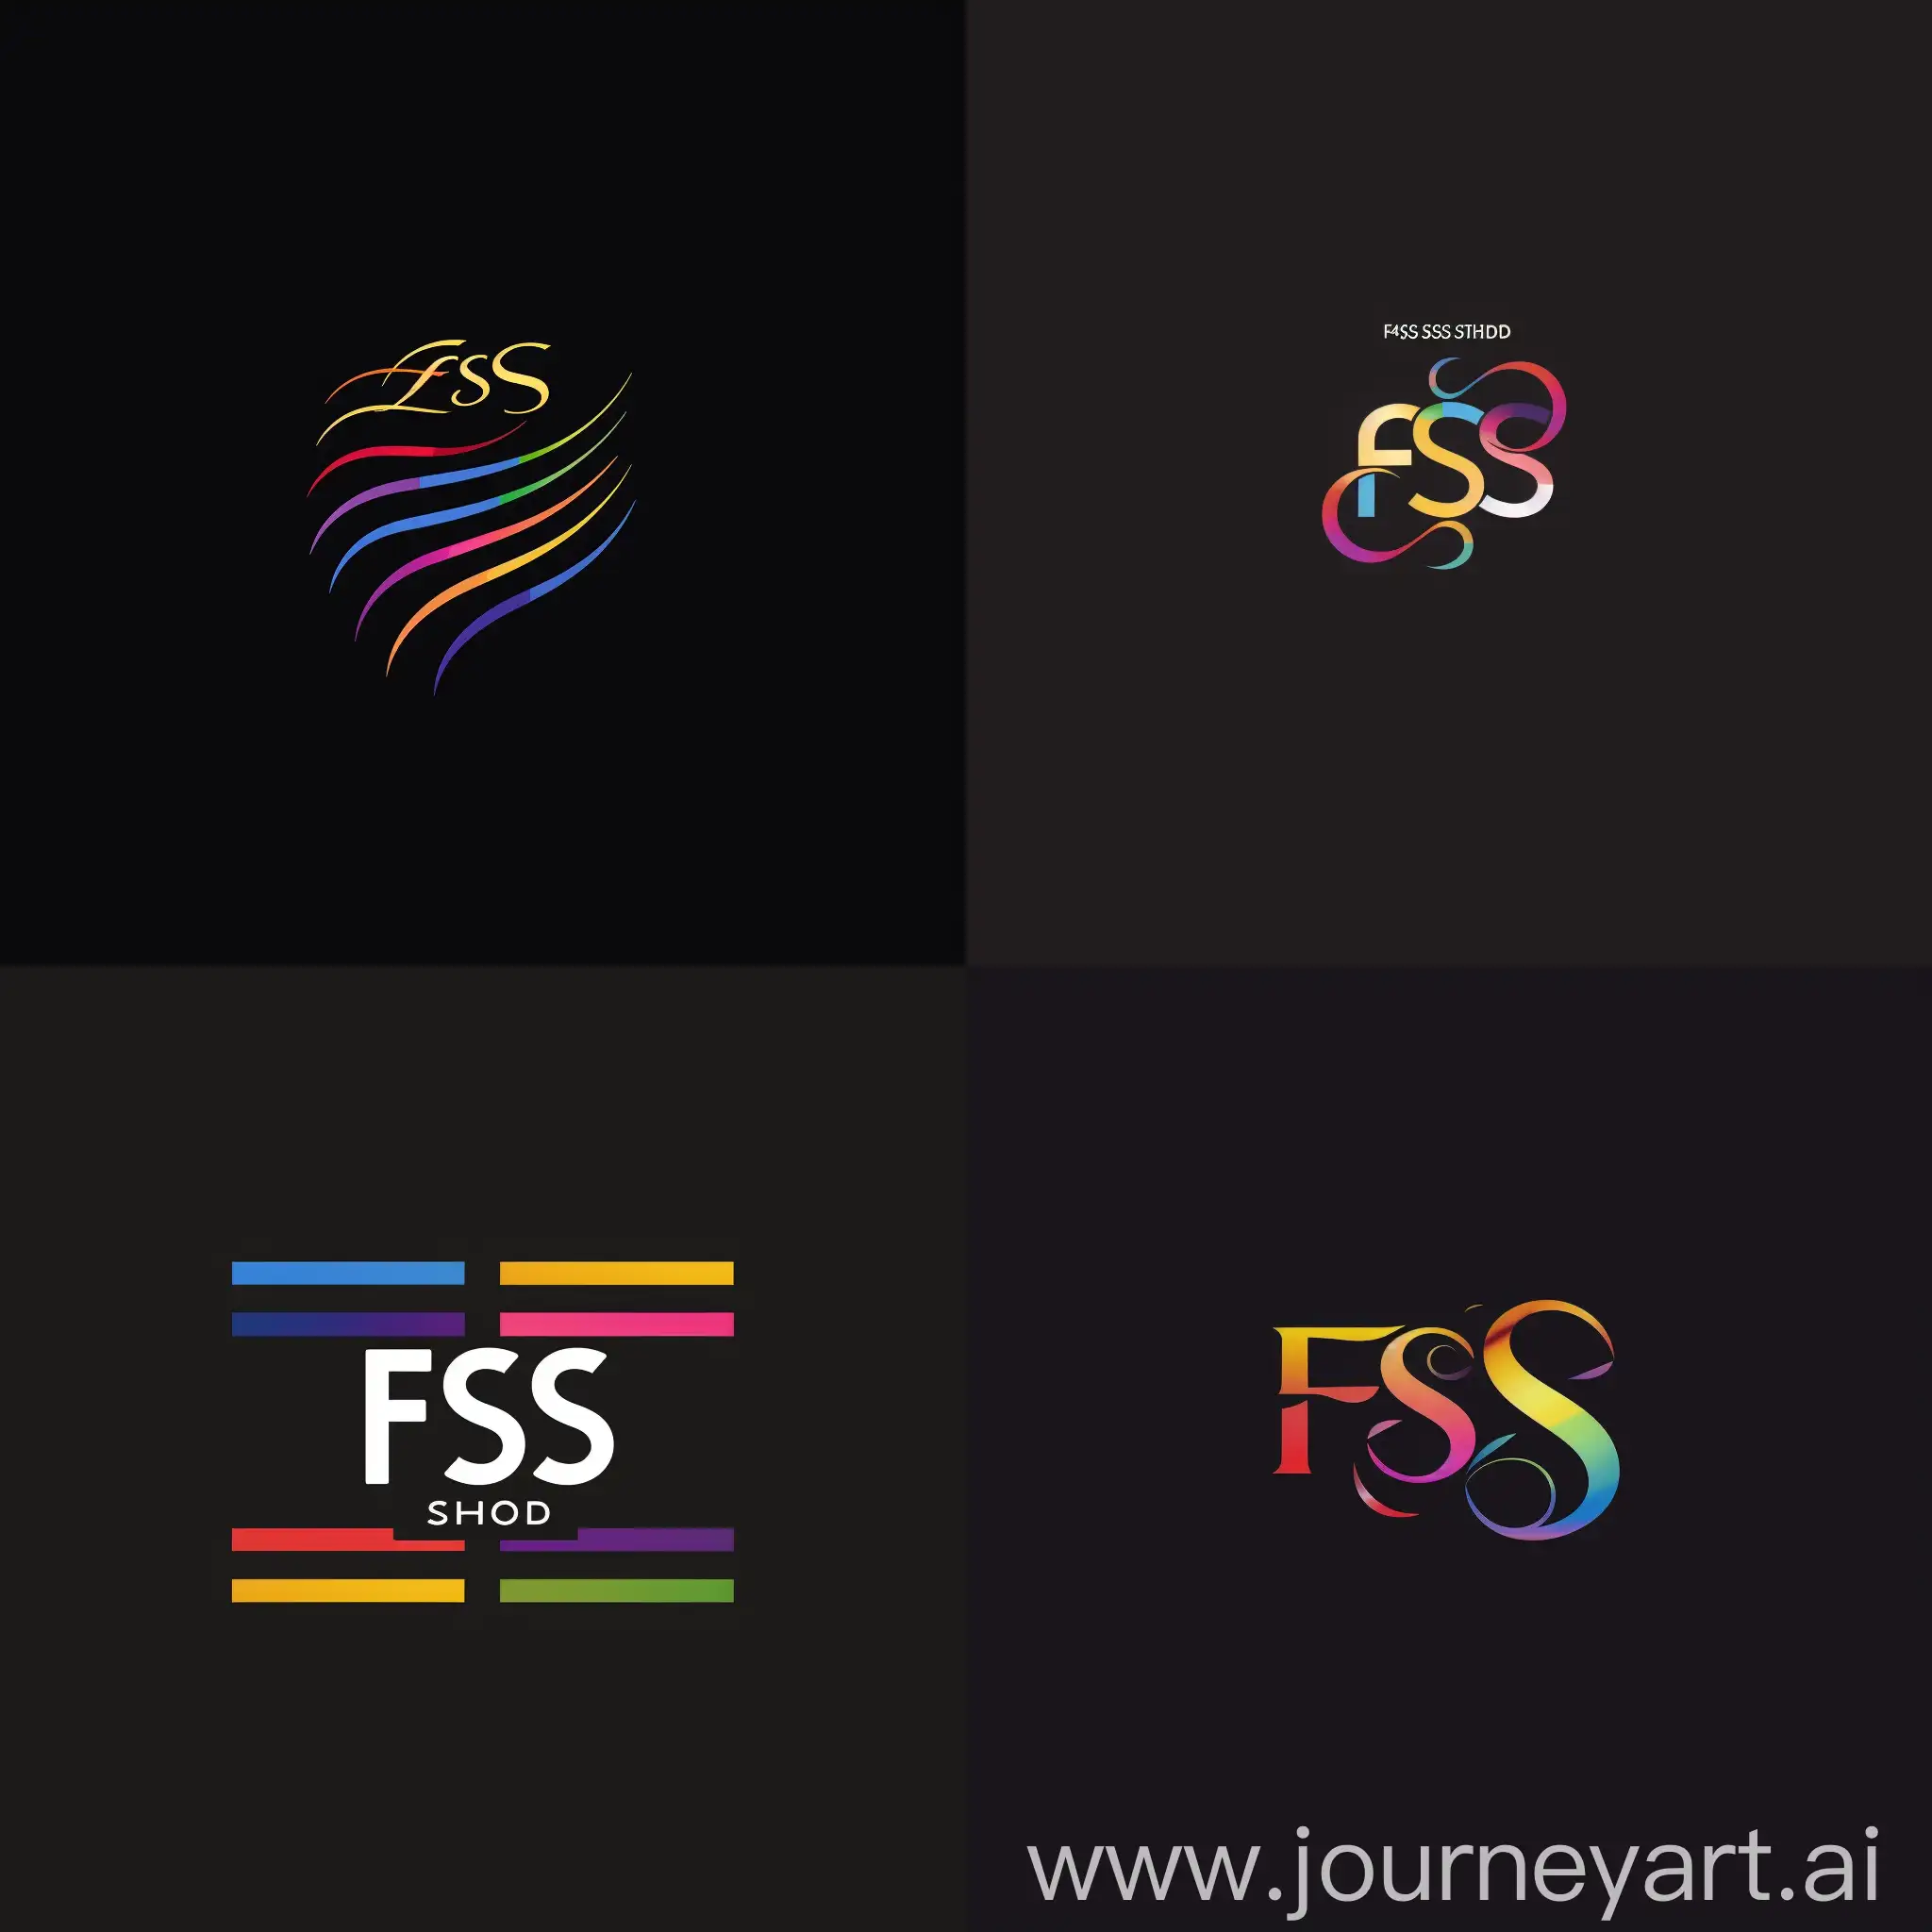 logo for "FSS" or Four Seasons Studio. An online styling website based on color analysis. make the logo black, somehow related to color analysis or fashion or styling with the typography or design. Professional award winning logo.